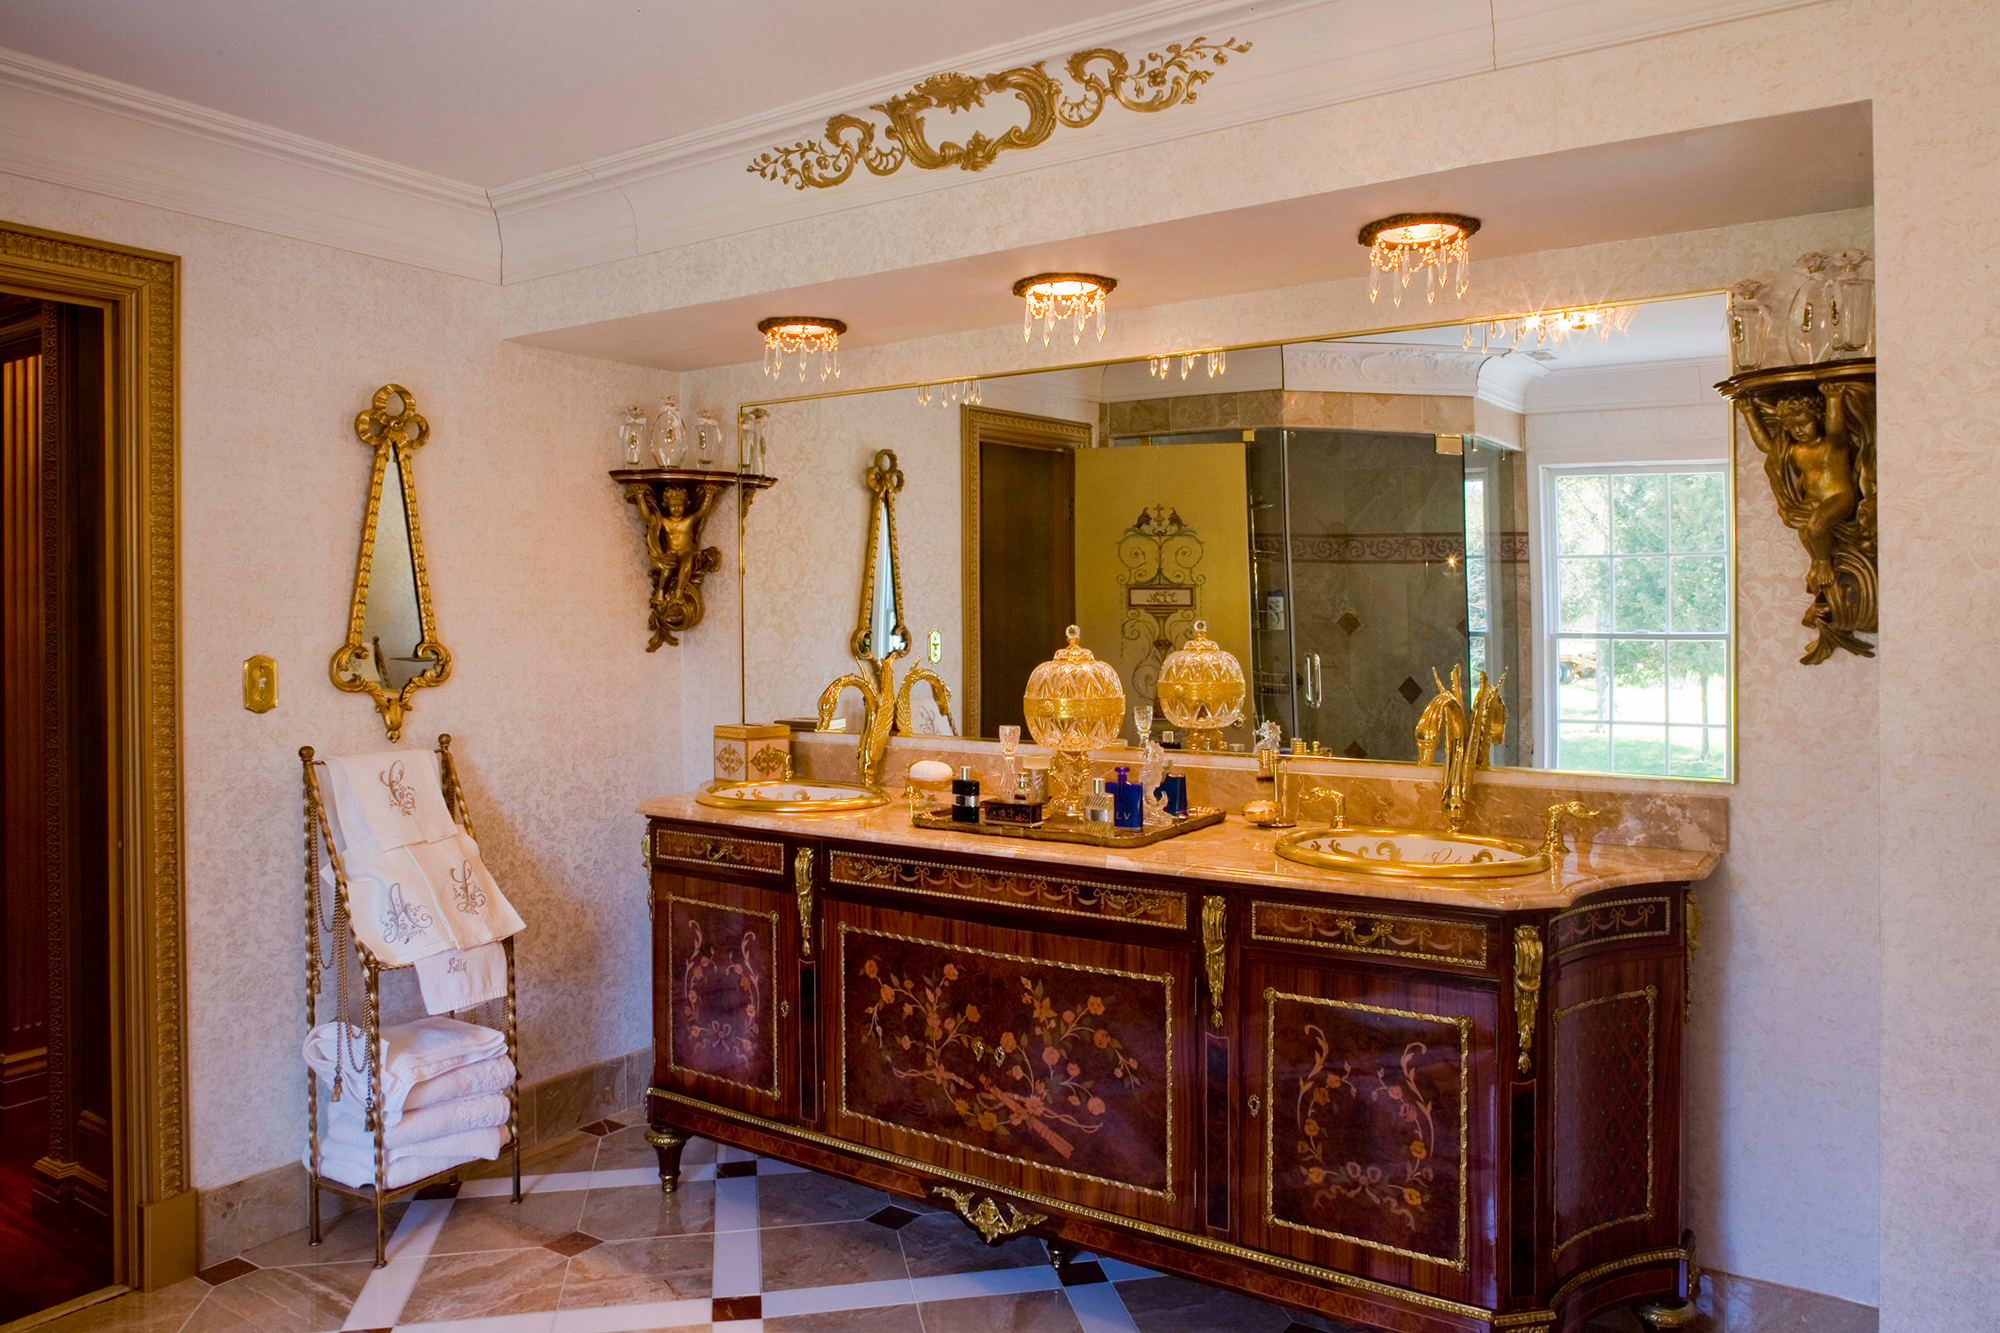 Recessed light trims with crystals are beautiful with the classic vanity in this primary bathroom